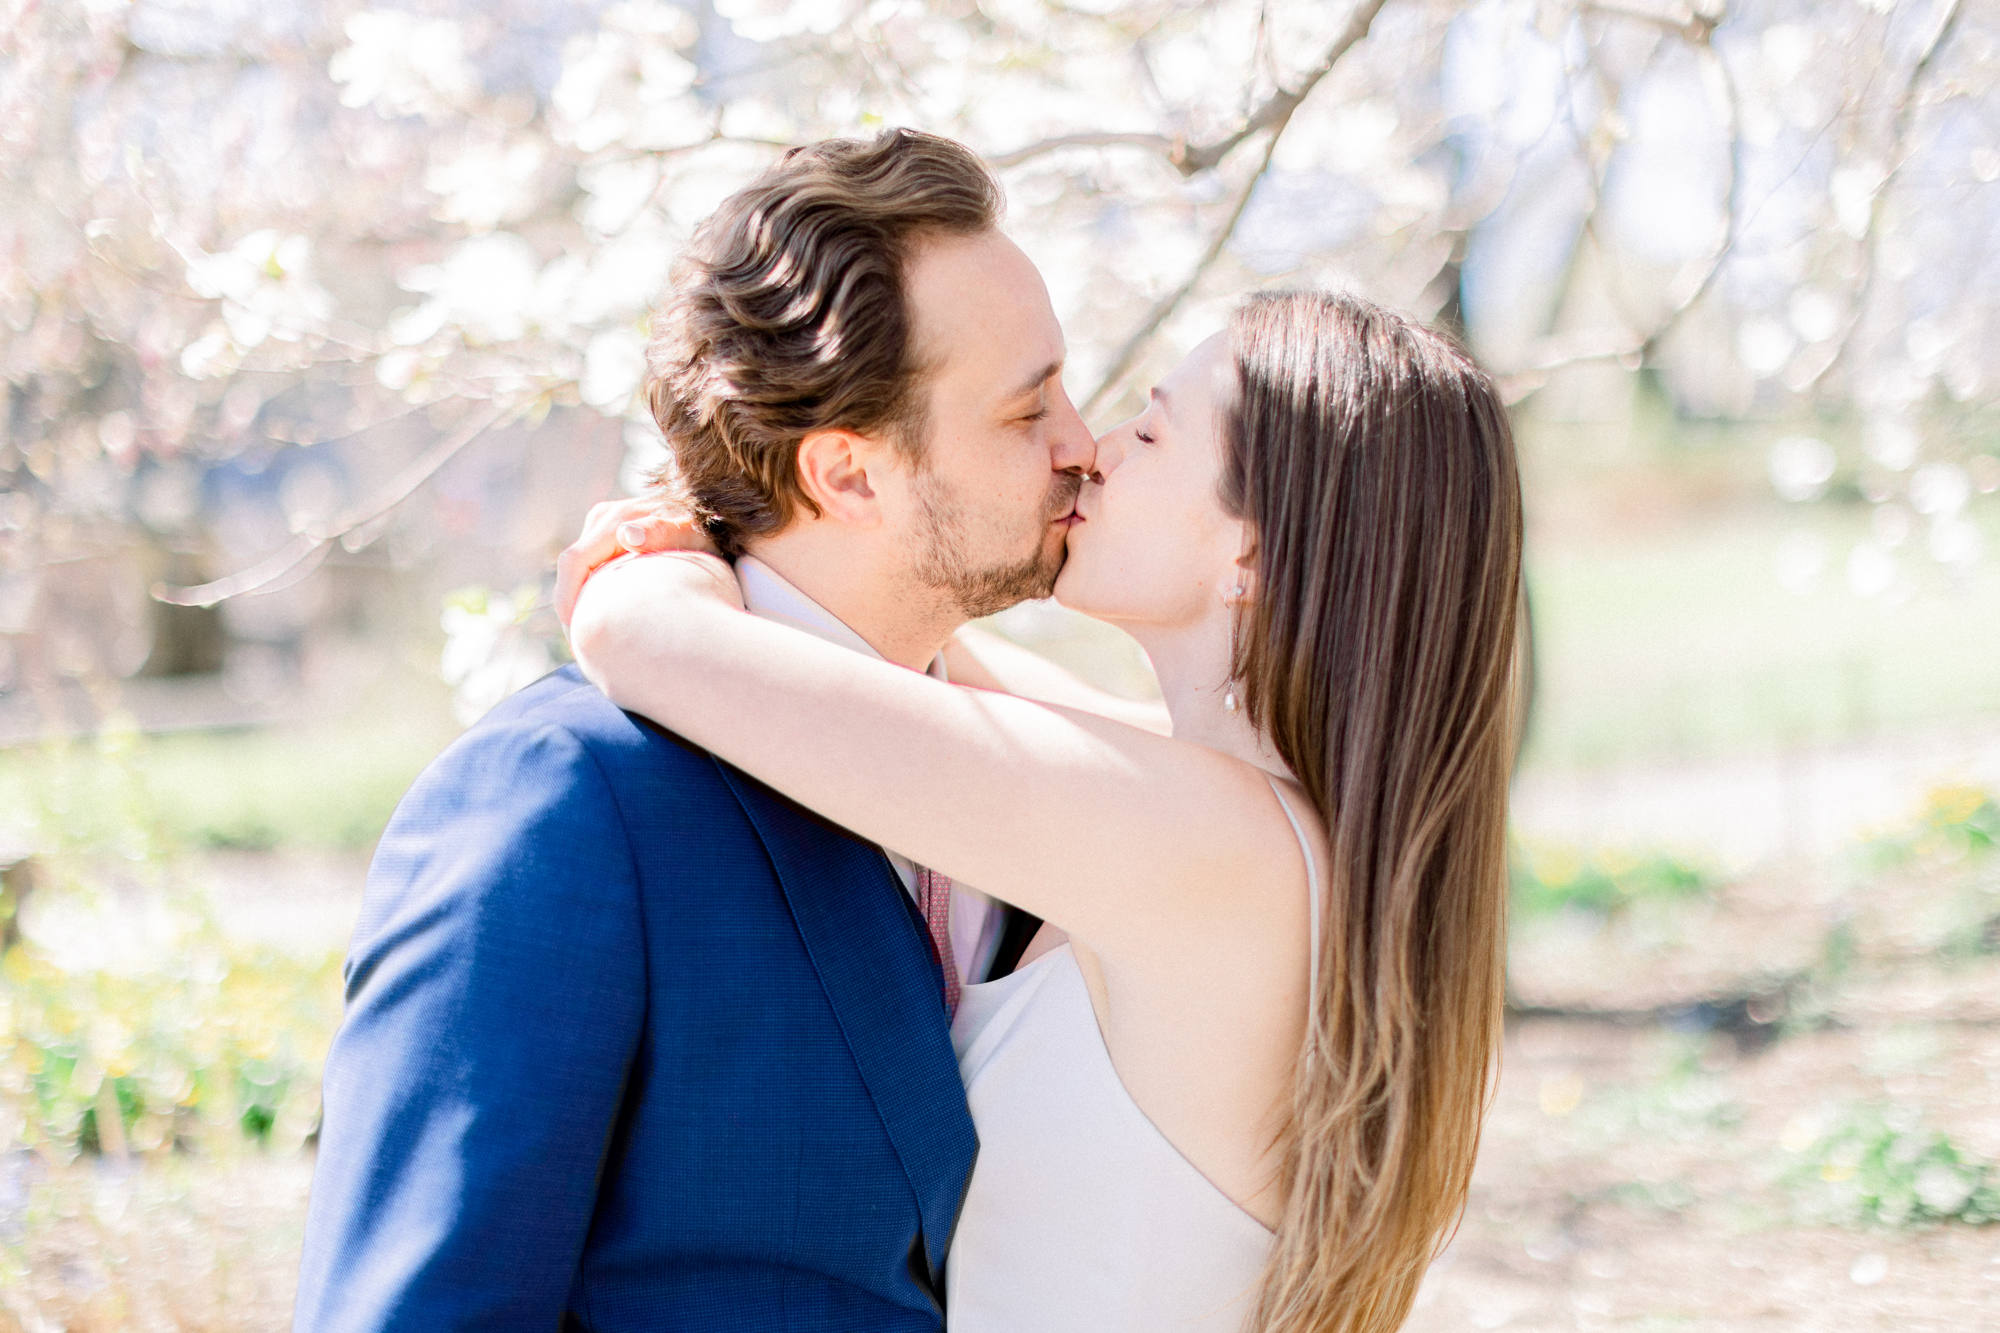 Romantic Spring Bow Bridge Wedding in Central Park Among the Cherry Blossoms